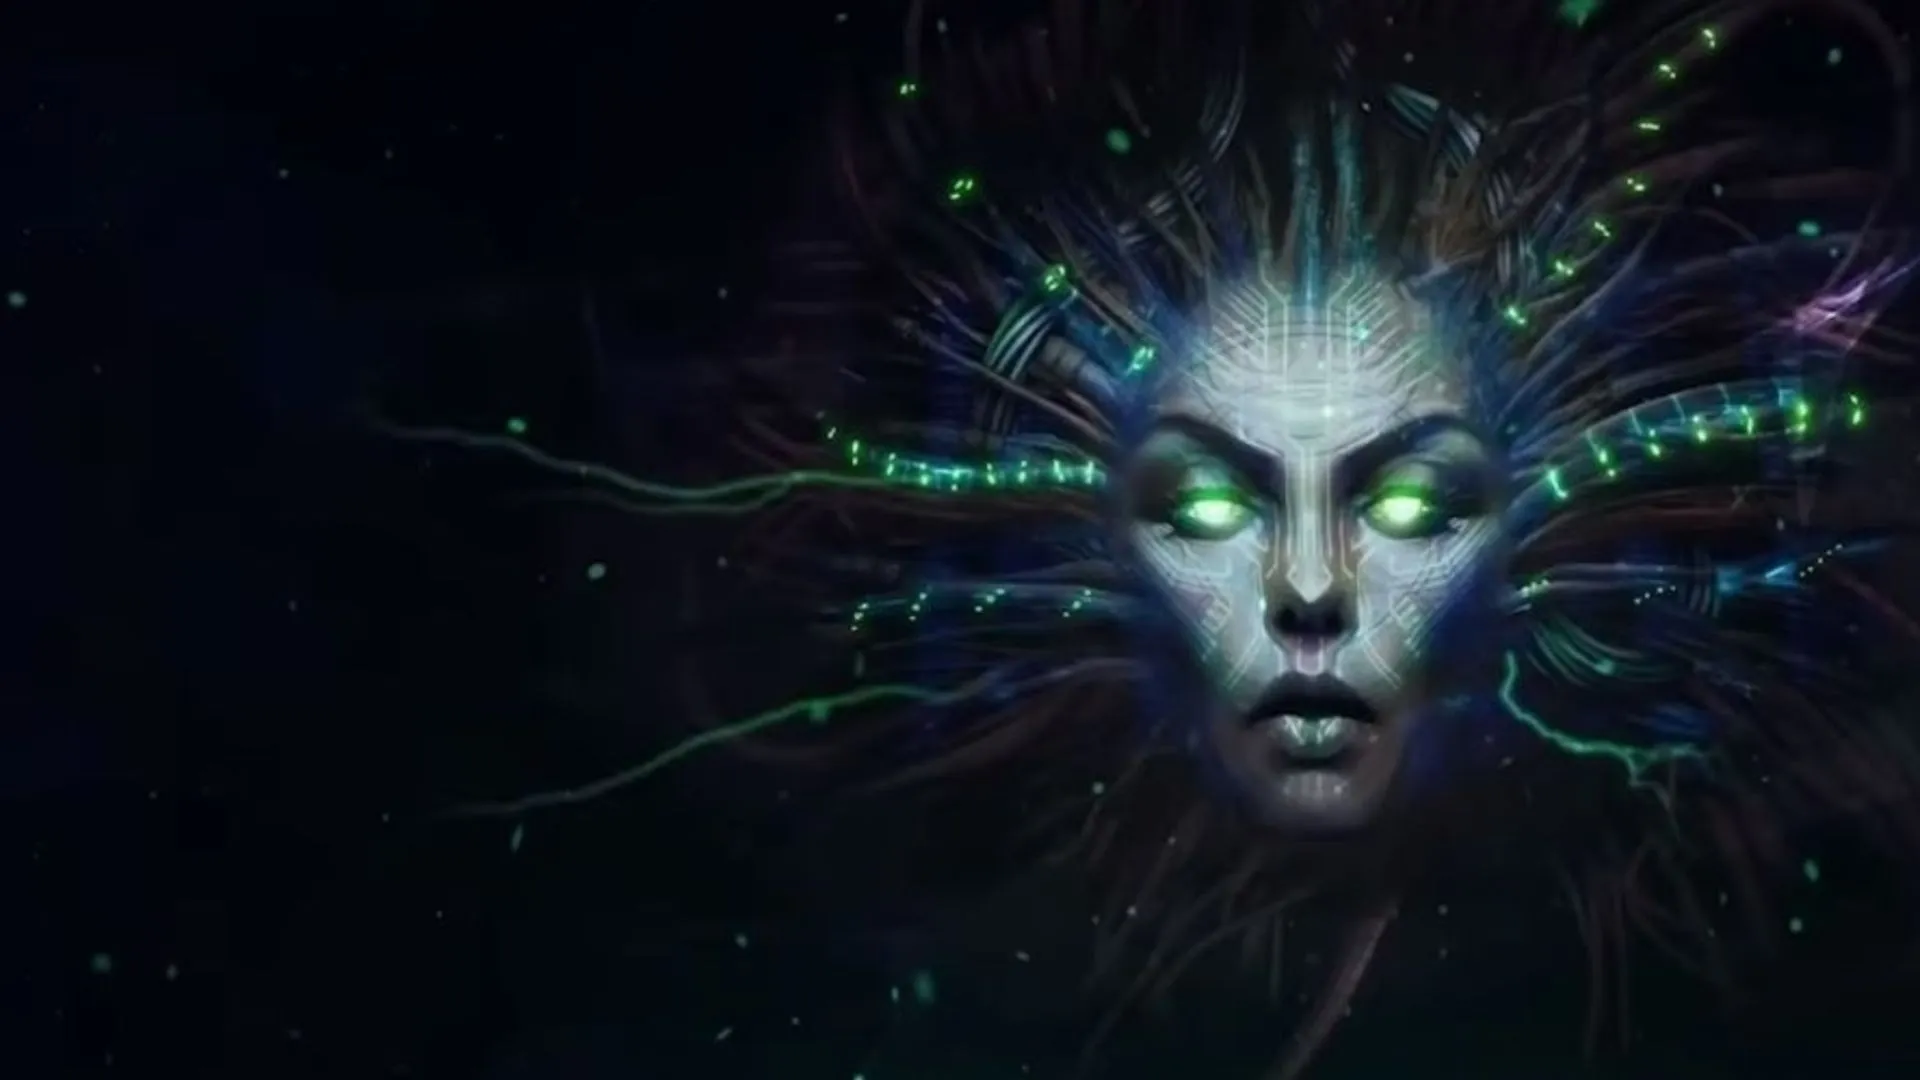  Tencent to take “System Shock franchise forward,” but Nightdive claims IP ownership 